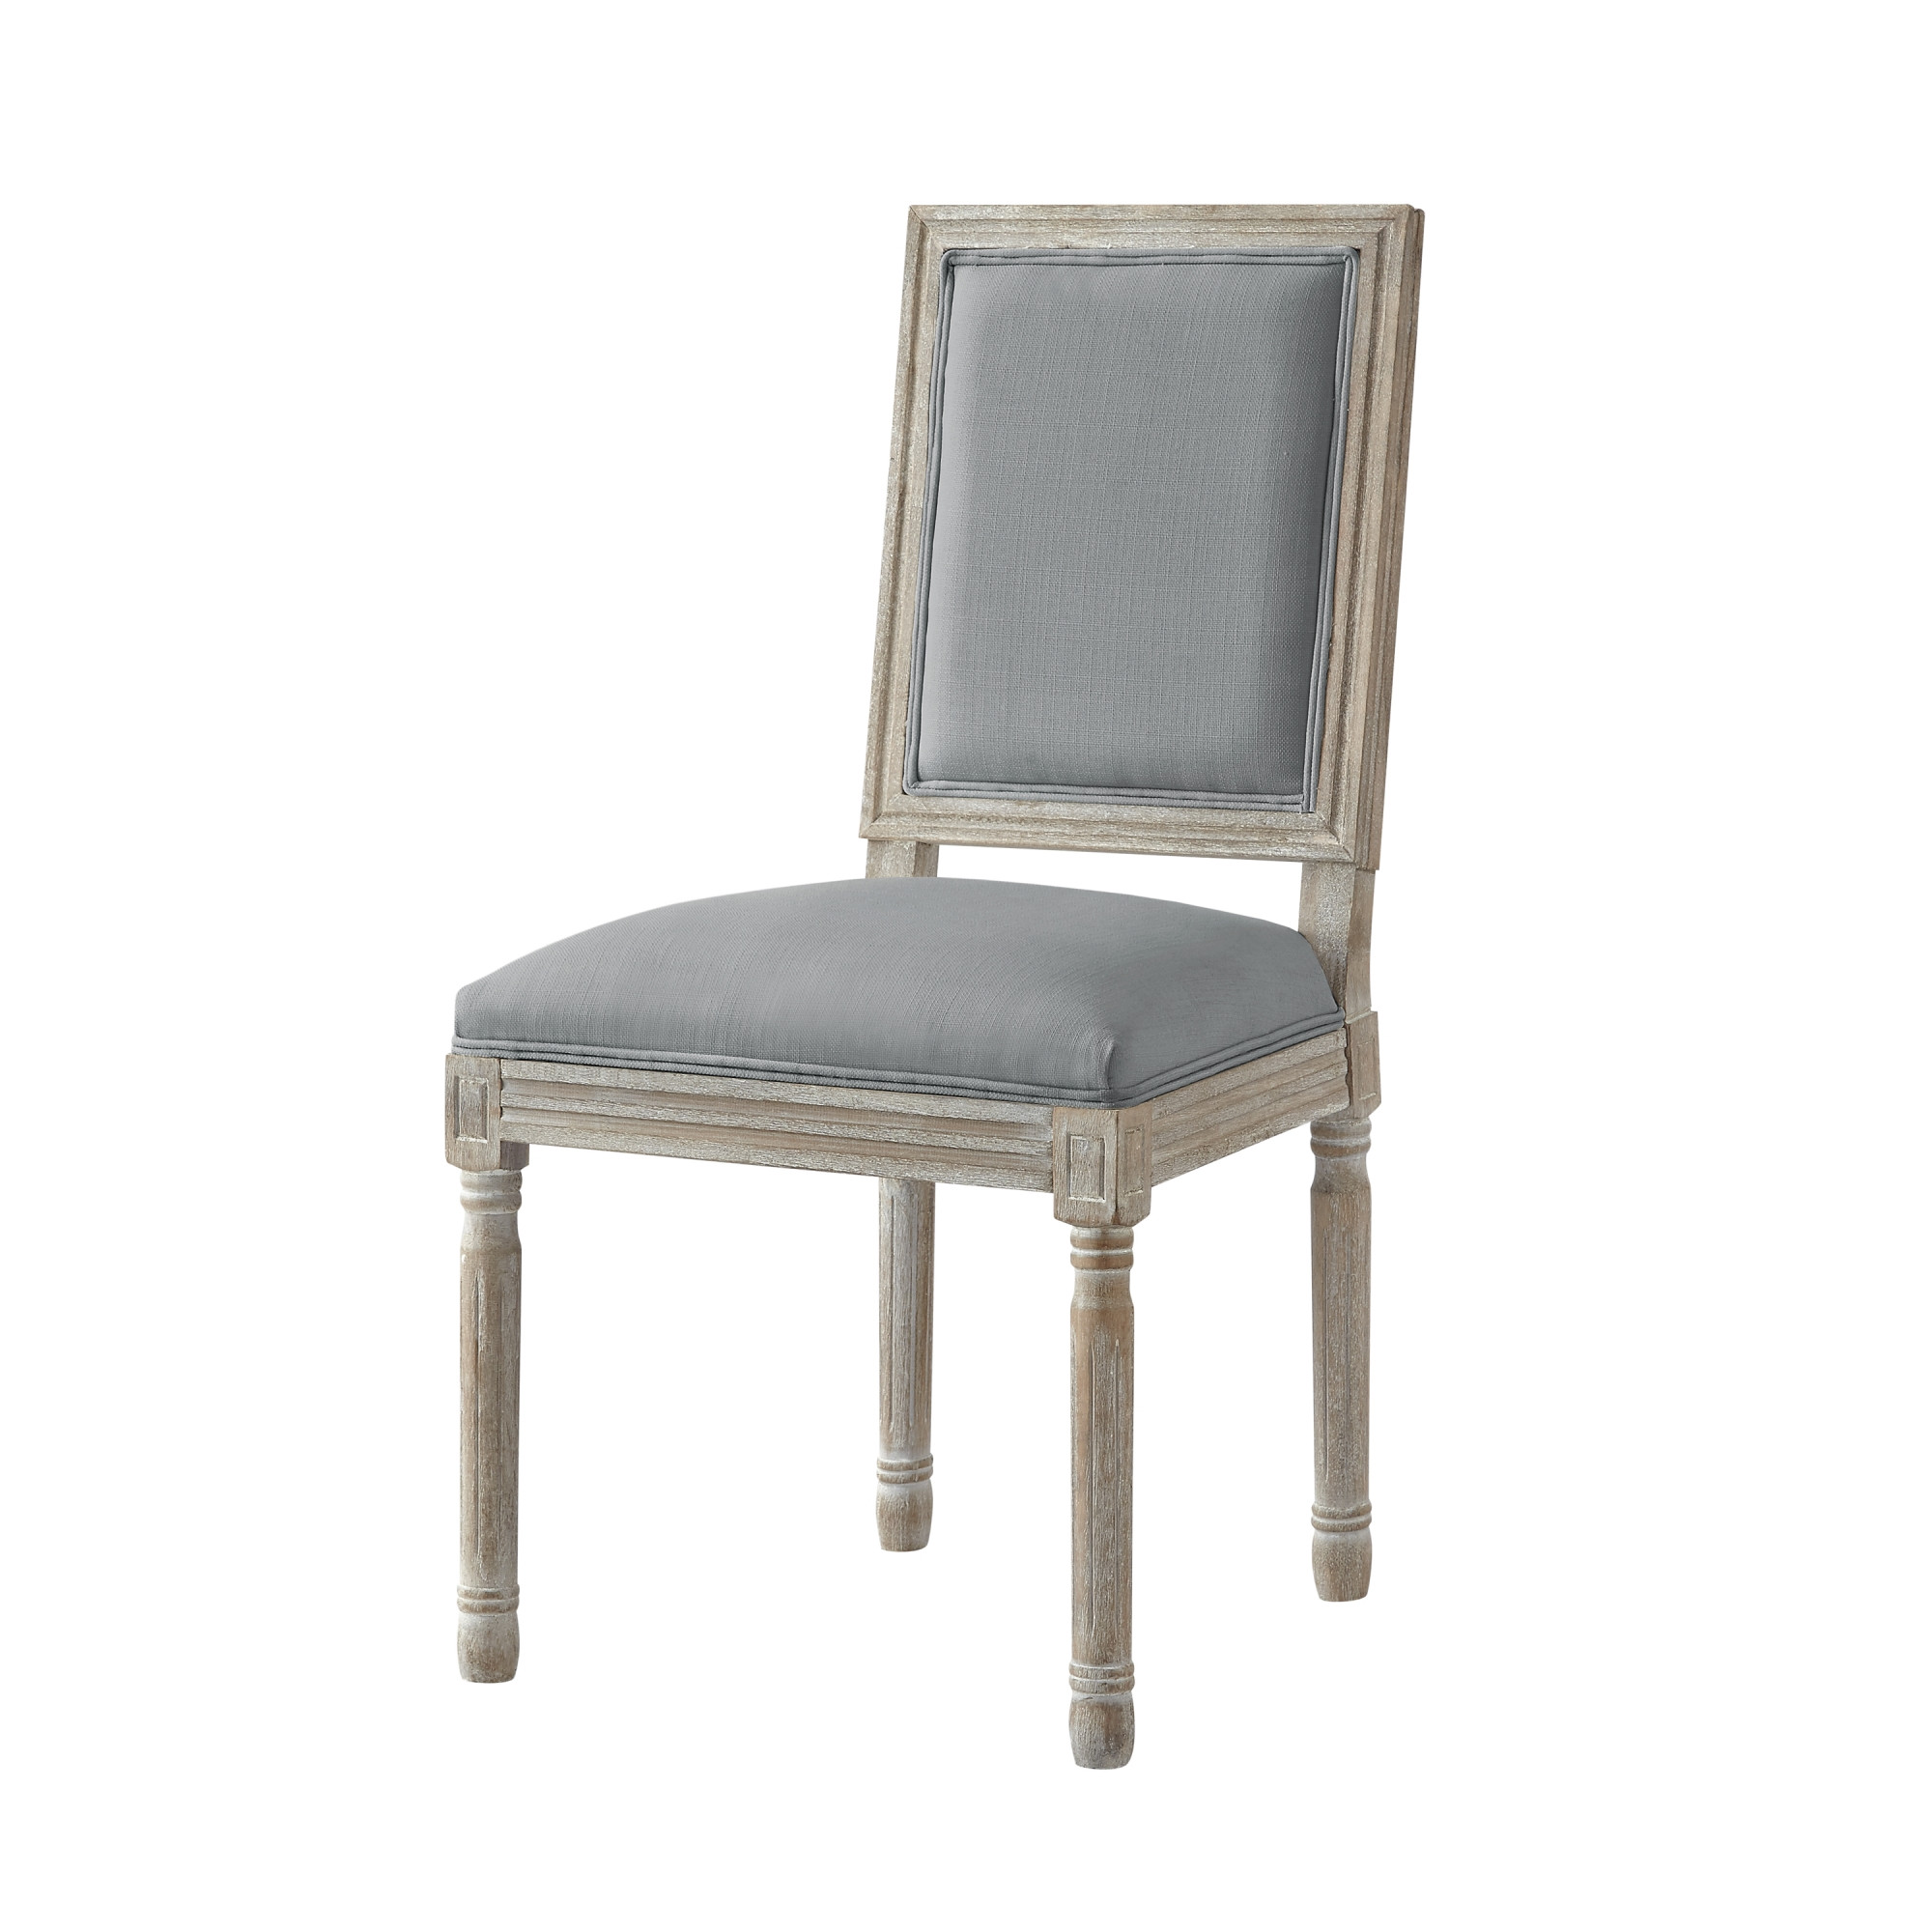 Set of Two Gray and Brown Upholstered Linen Dining Side Chairs-535364-1